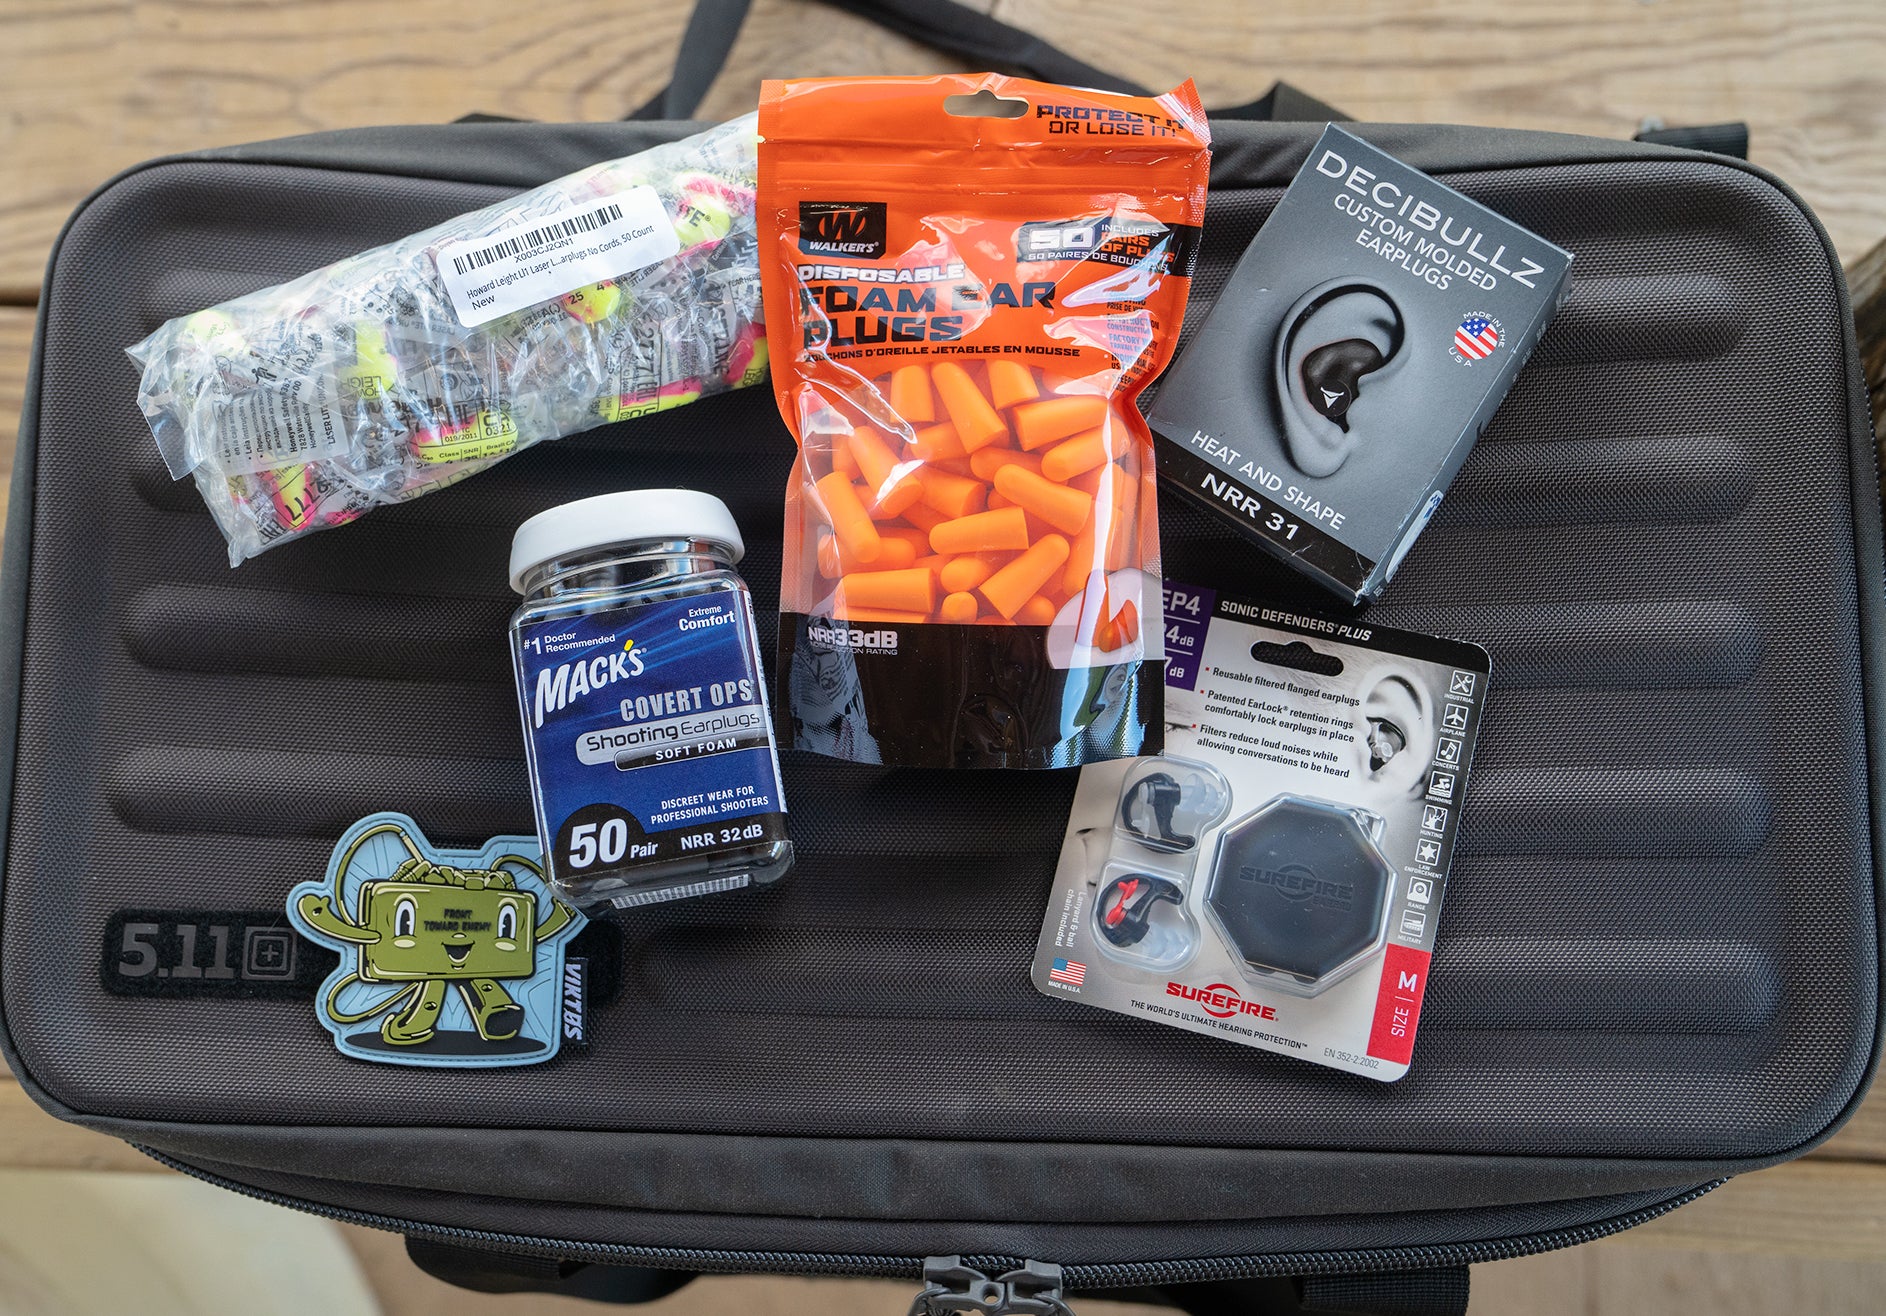 WHAT ARE THE BEST SHOOTING EAR PLUGS FOR MY FIRST RANGE DAY?